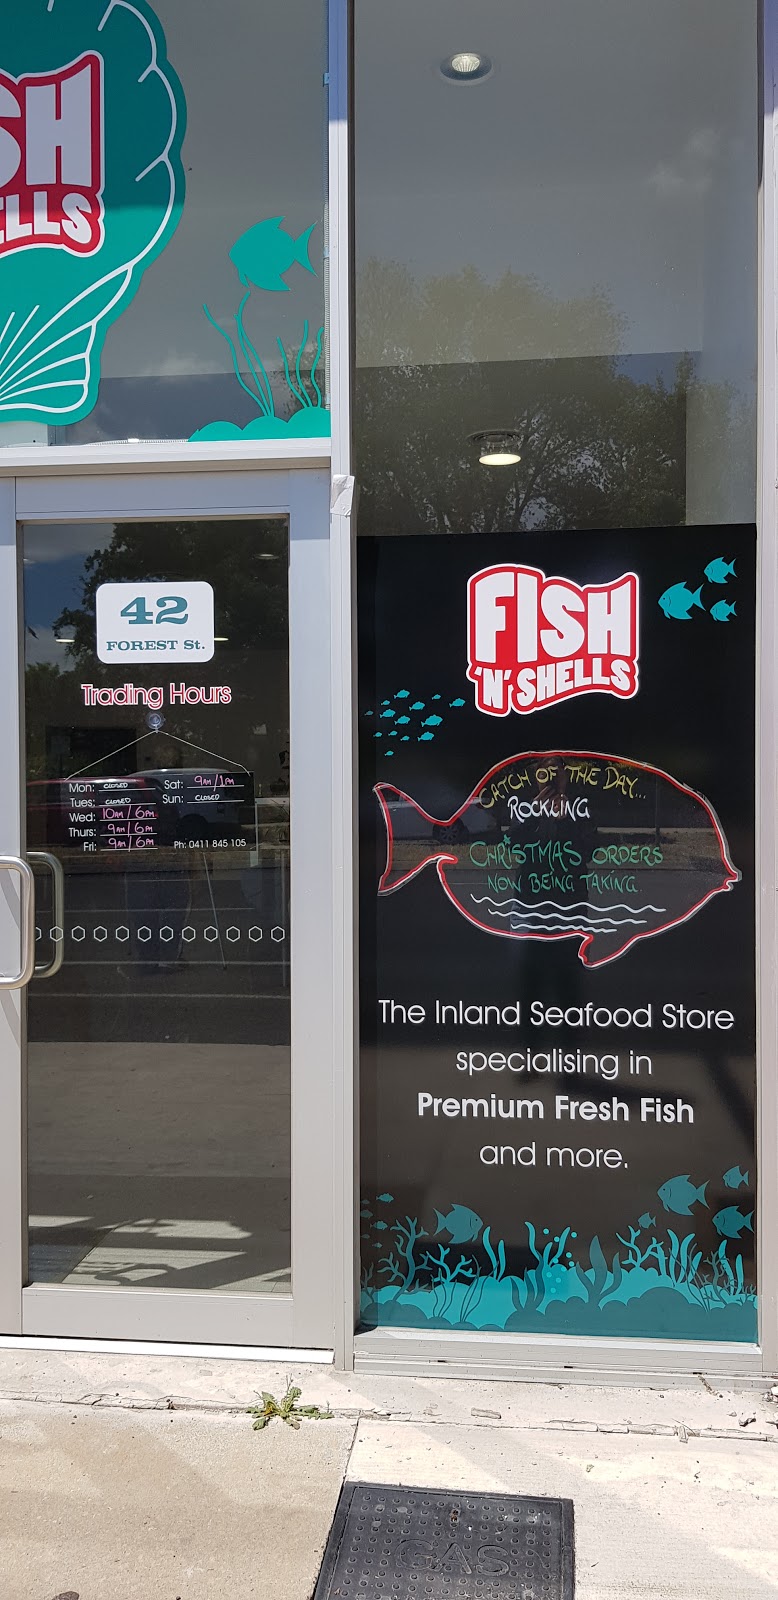 FISH N SHELLS | food | 42 Forest St, Castlemaine VIC 3450, Australia | 0411845105 OR +61 411 845 105